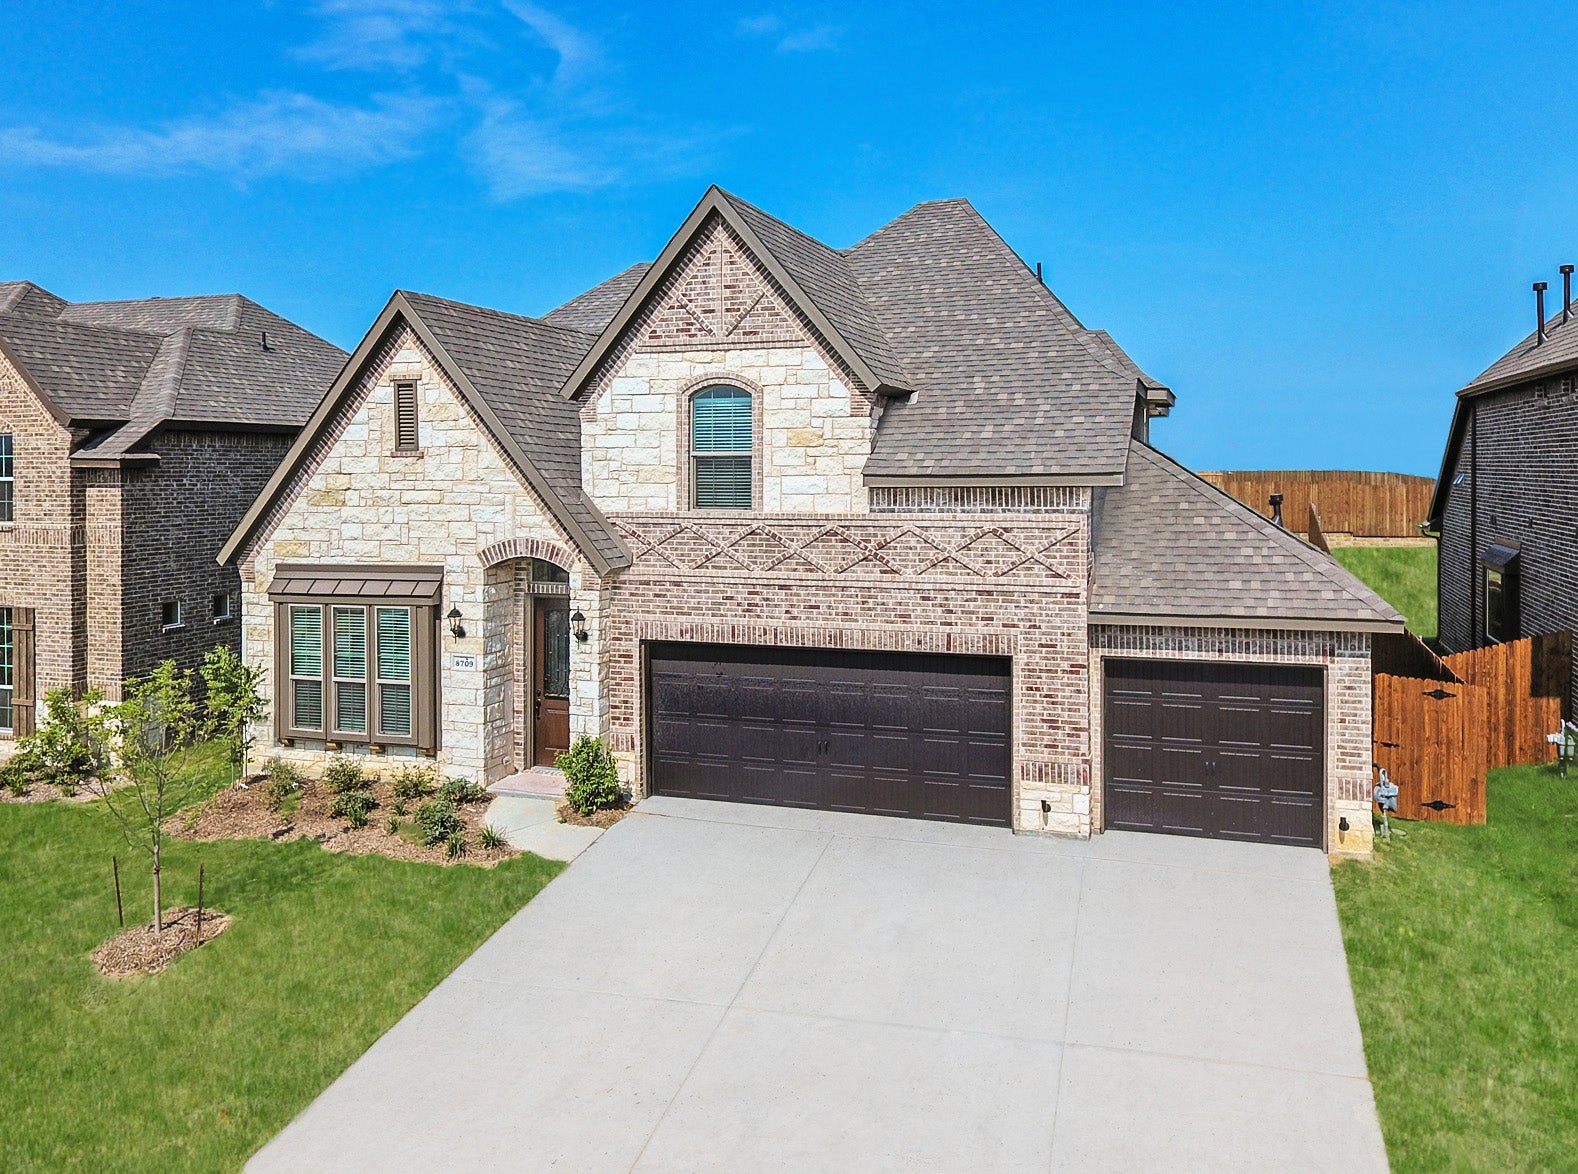 3015 C with Stone. 3,015sf New Home in Joshua, TX